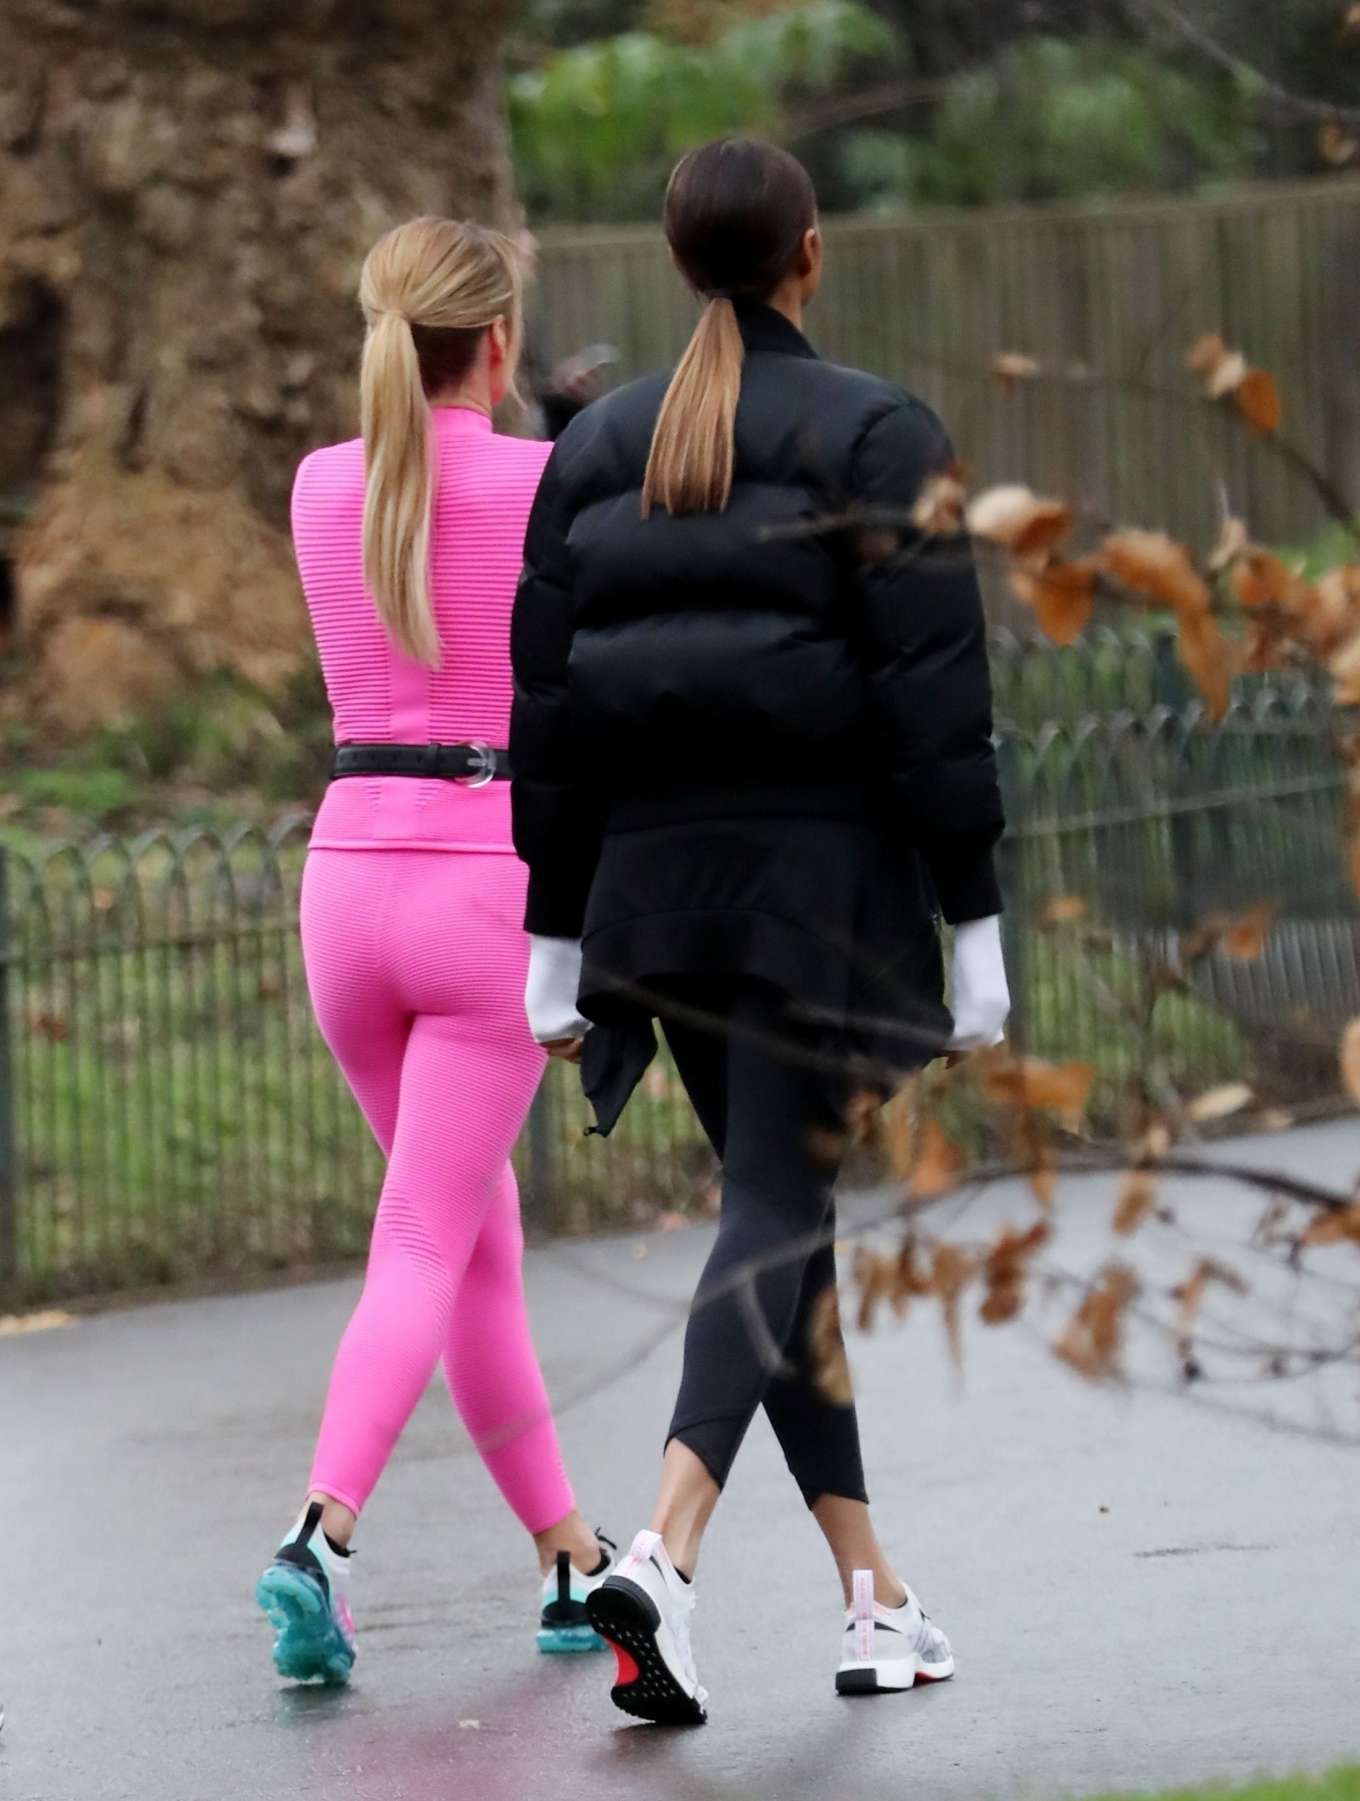 Amanda Holden and Alesha Dixon - Filming the upcoming series of BGT at a local park in London